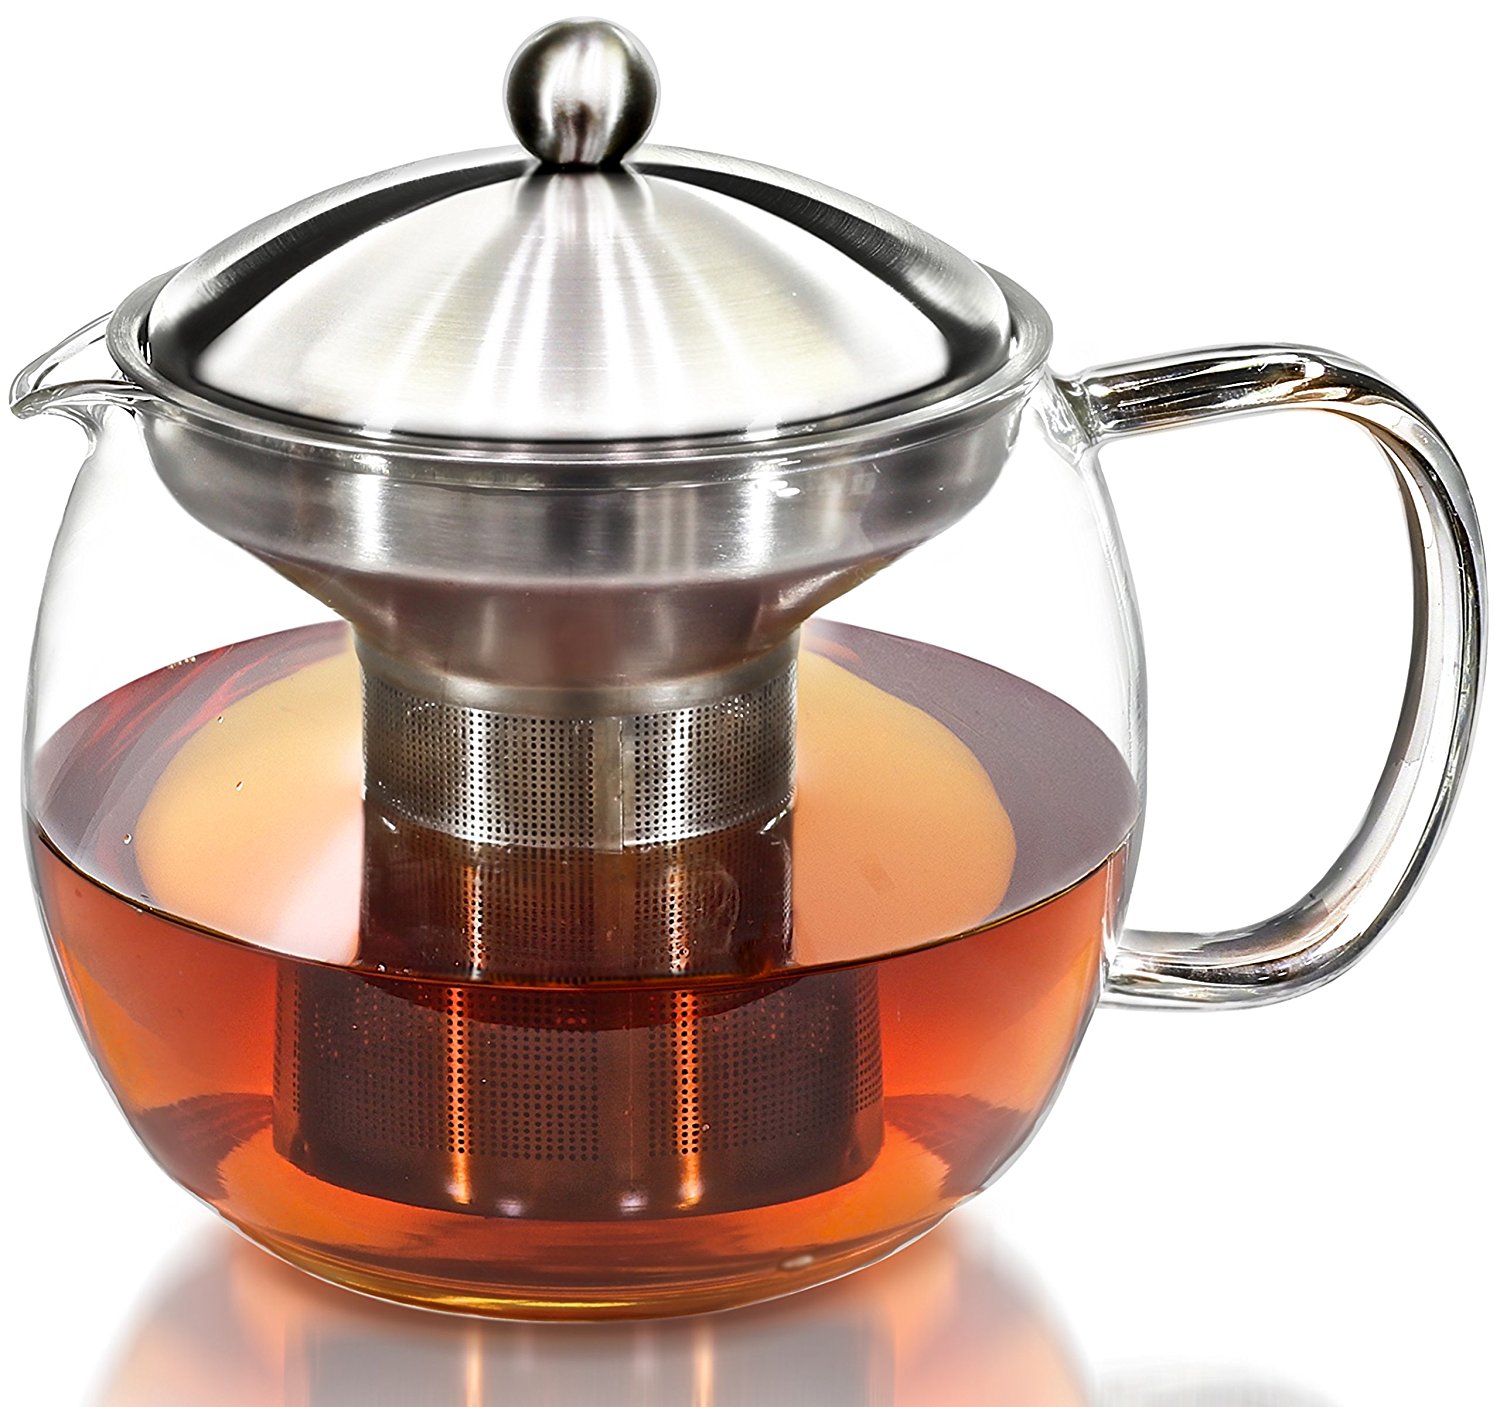 Glass Teapot with Infuser XAGOO Glass Teapots Large 1500 ml Blooming and Loose Leaf Tea Pot with Stainless Steel Infuser 